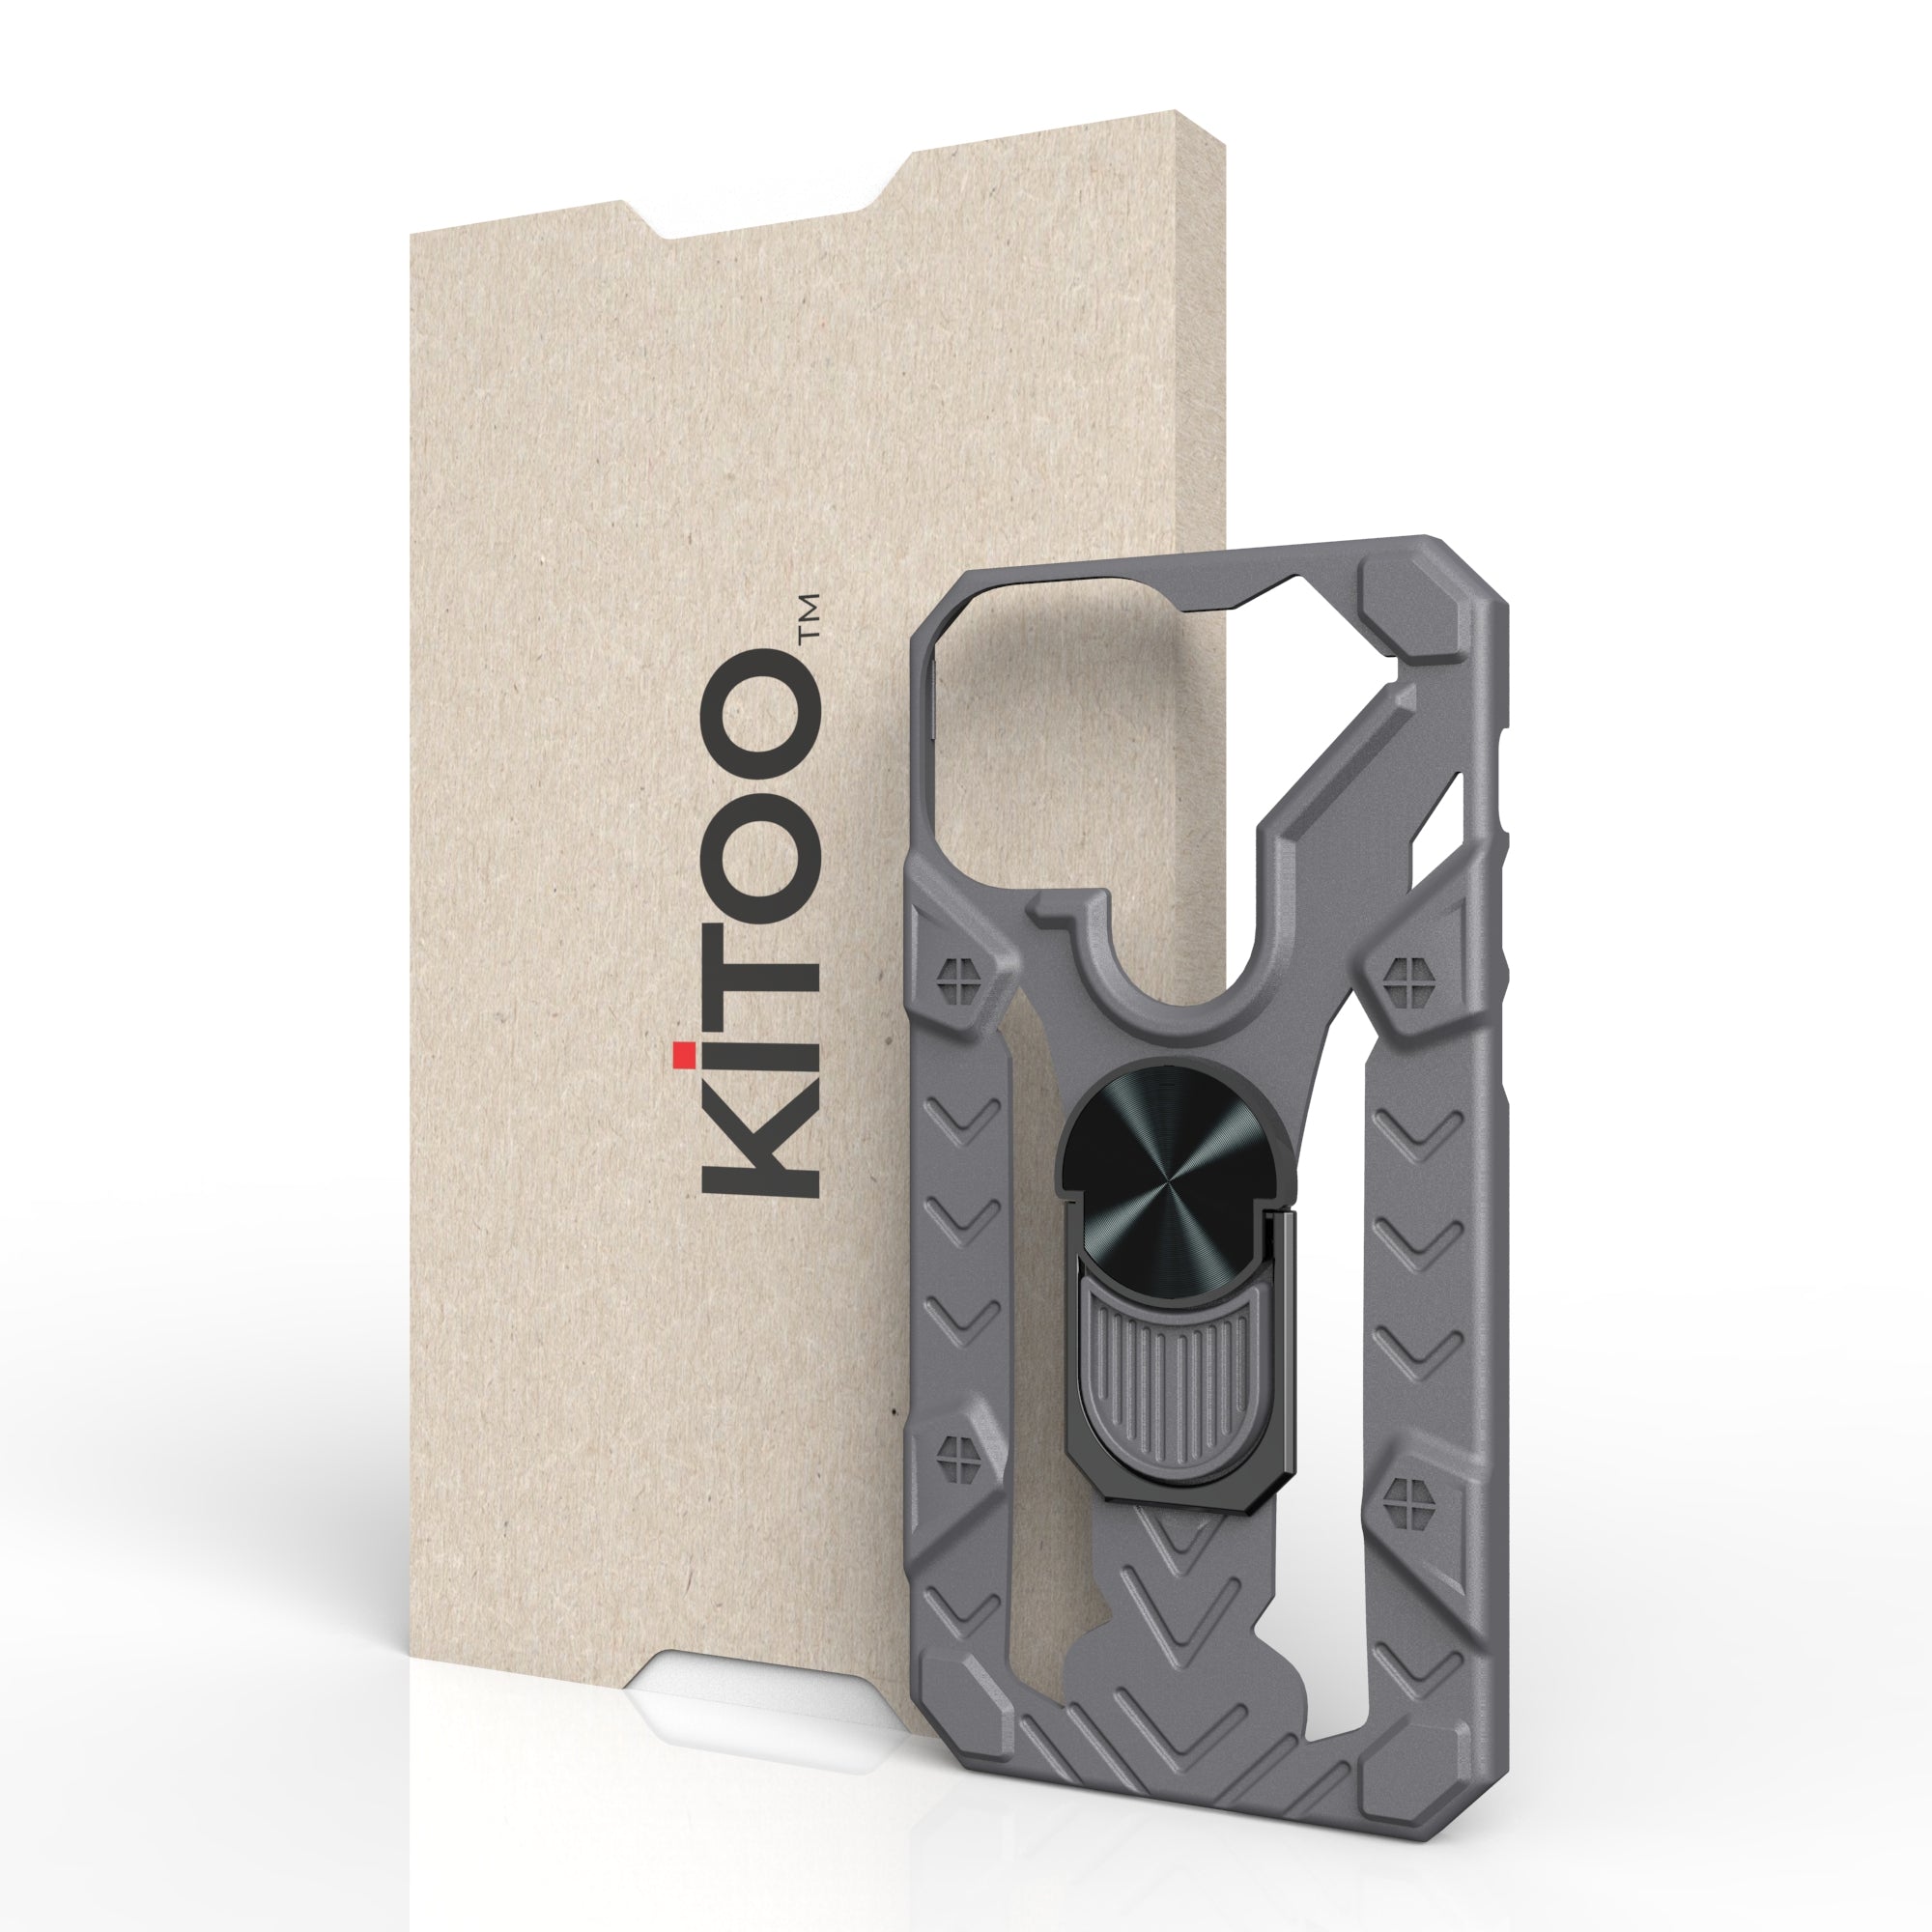 Kitoo Ring Panel Designed for iPhone 13 Mini case (Spare Part only) - Grey